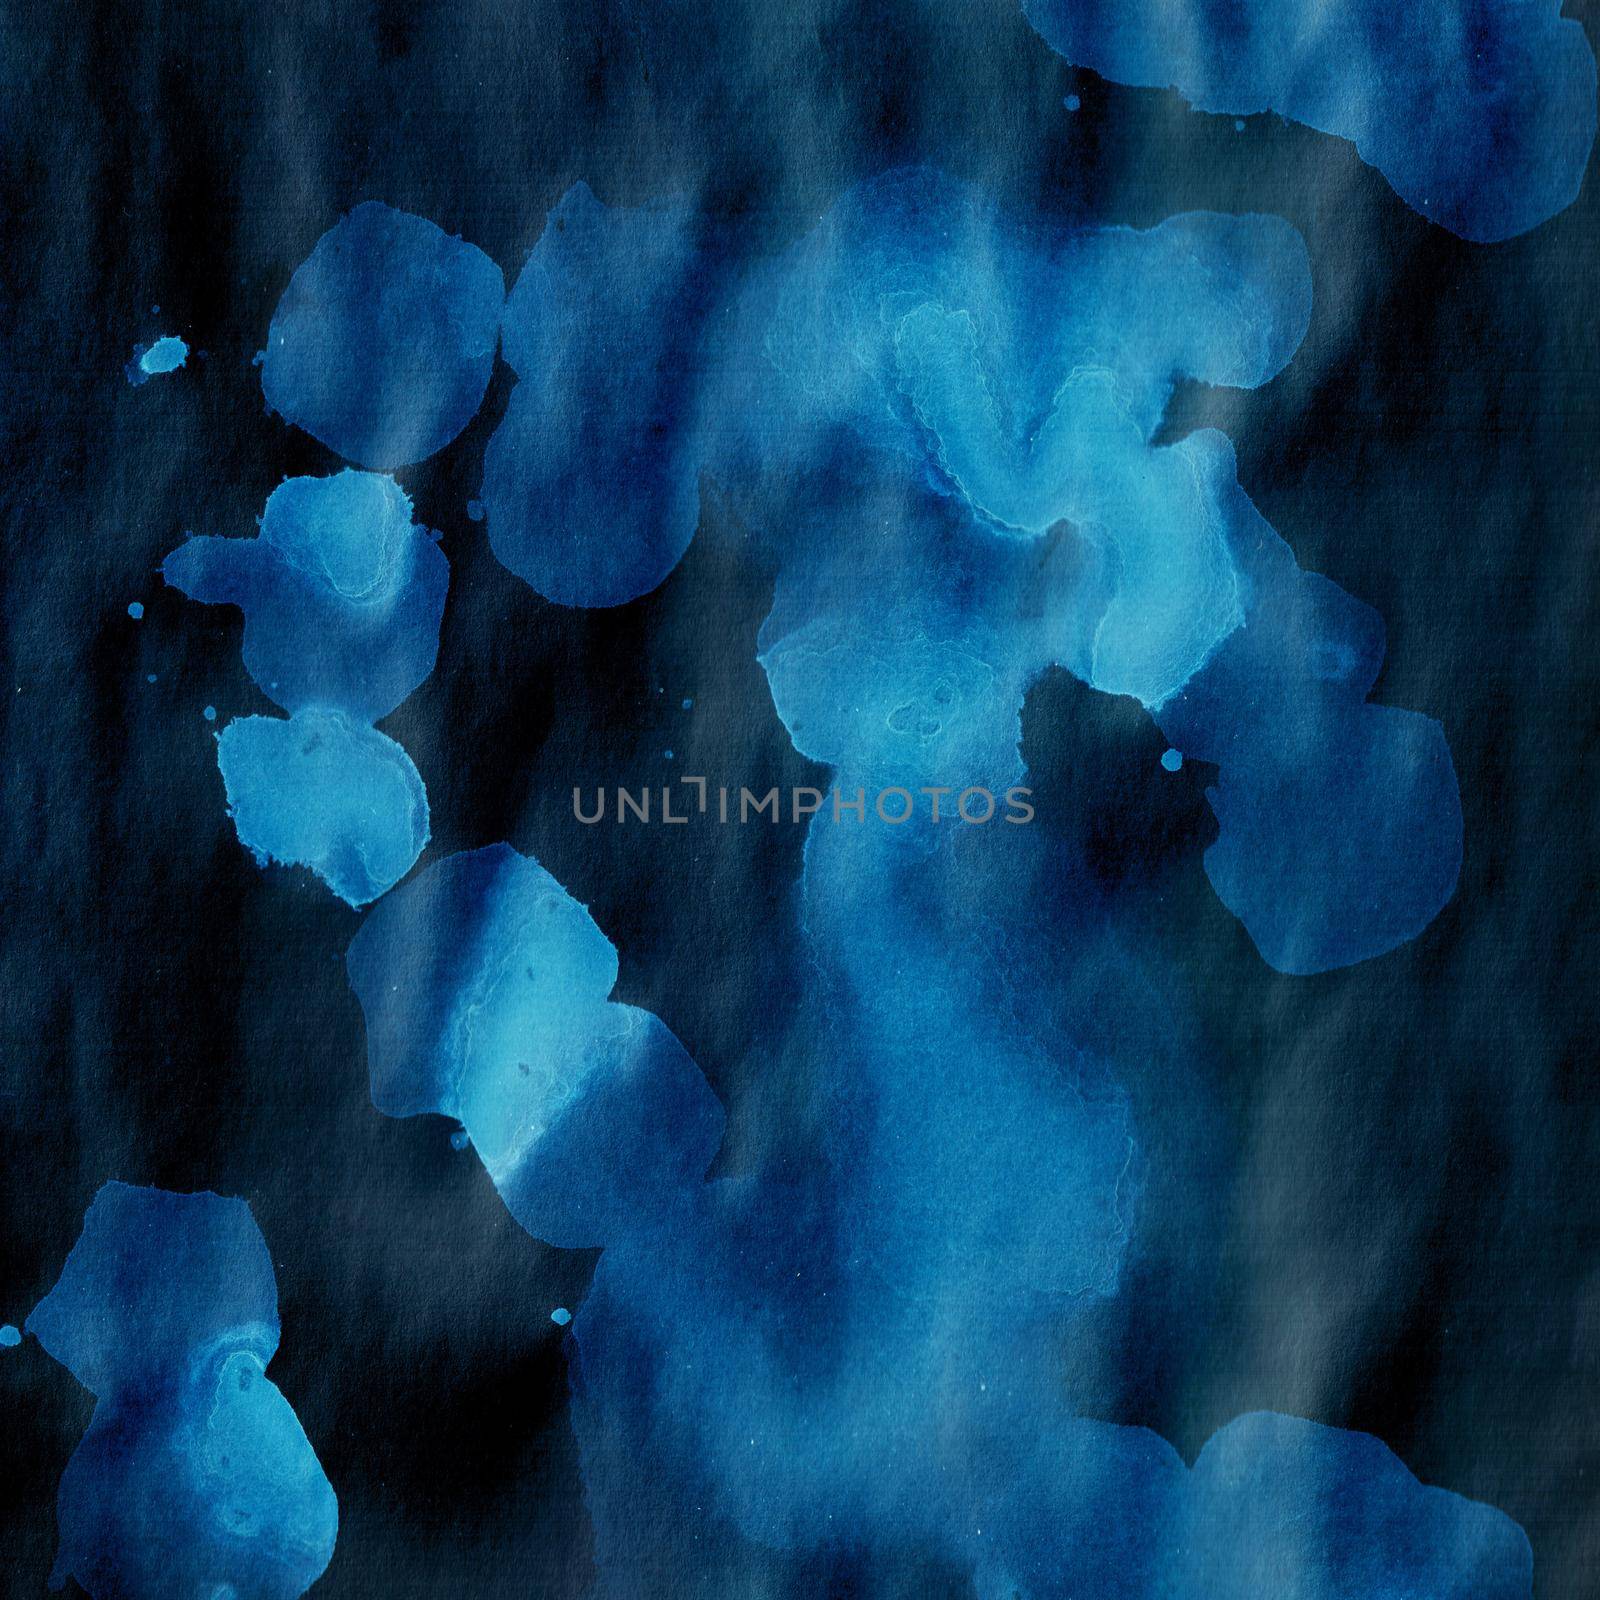 Black and blue watercolor background